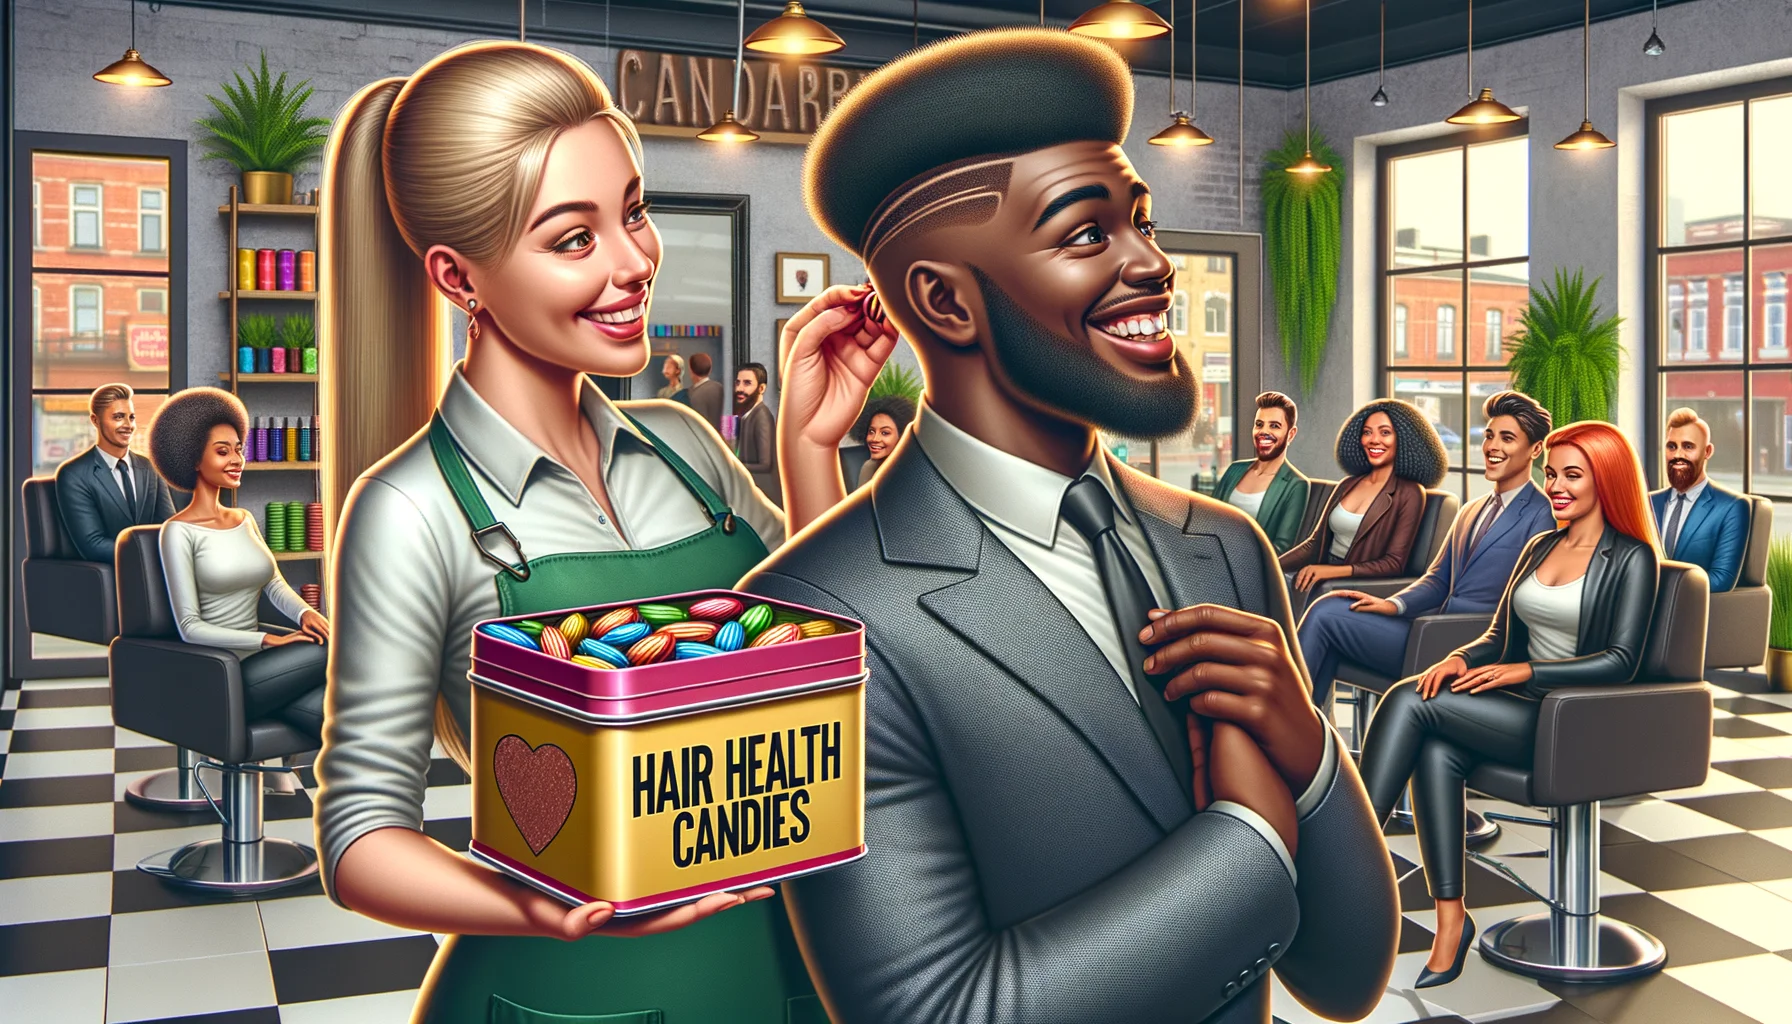 Create a humorous yet realistic scene showcasing 'Candy for Boosting Hair Health' in an ideal situation. Picture this: A female Caucasian hairdresser in a lively, urban salon presenting a vibrant tin labeled 'Hair Health Candies' to a delighted male Black customer with glossy, healthy hair that is styled to perfection. The salon is buzzing with other smartly dressed folks of different descents and genders, all eager to try this novel product. Relevance to hair health is evident by the presence of related products and signs around the salon.